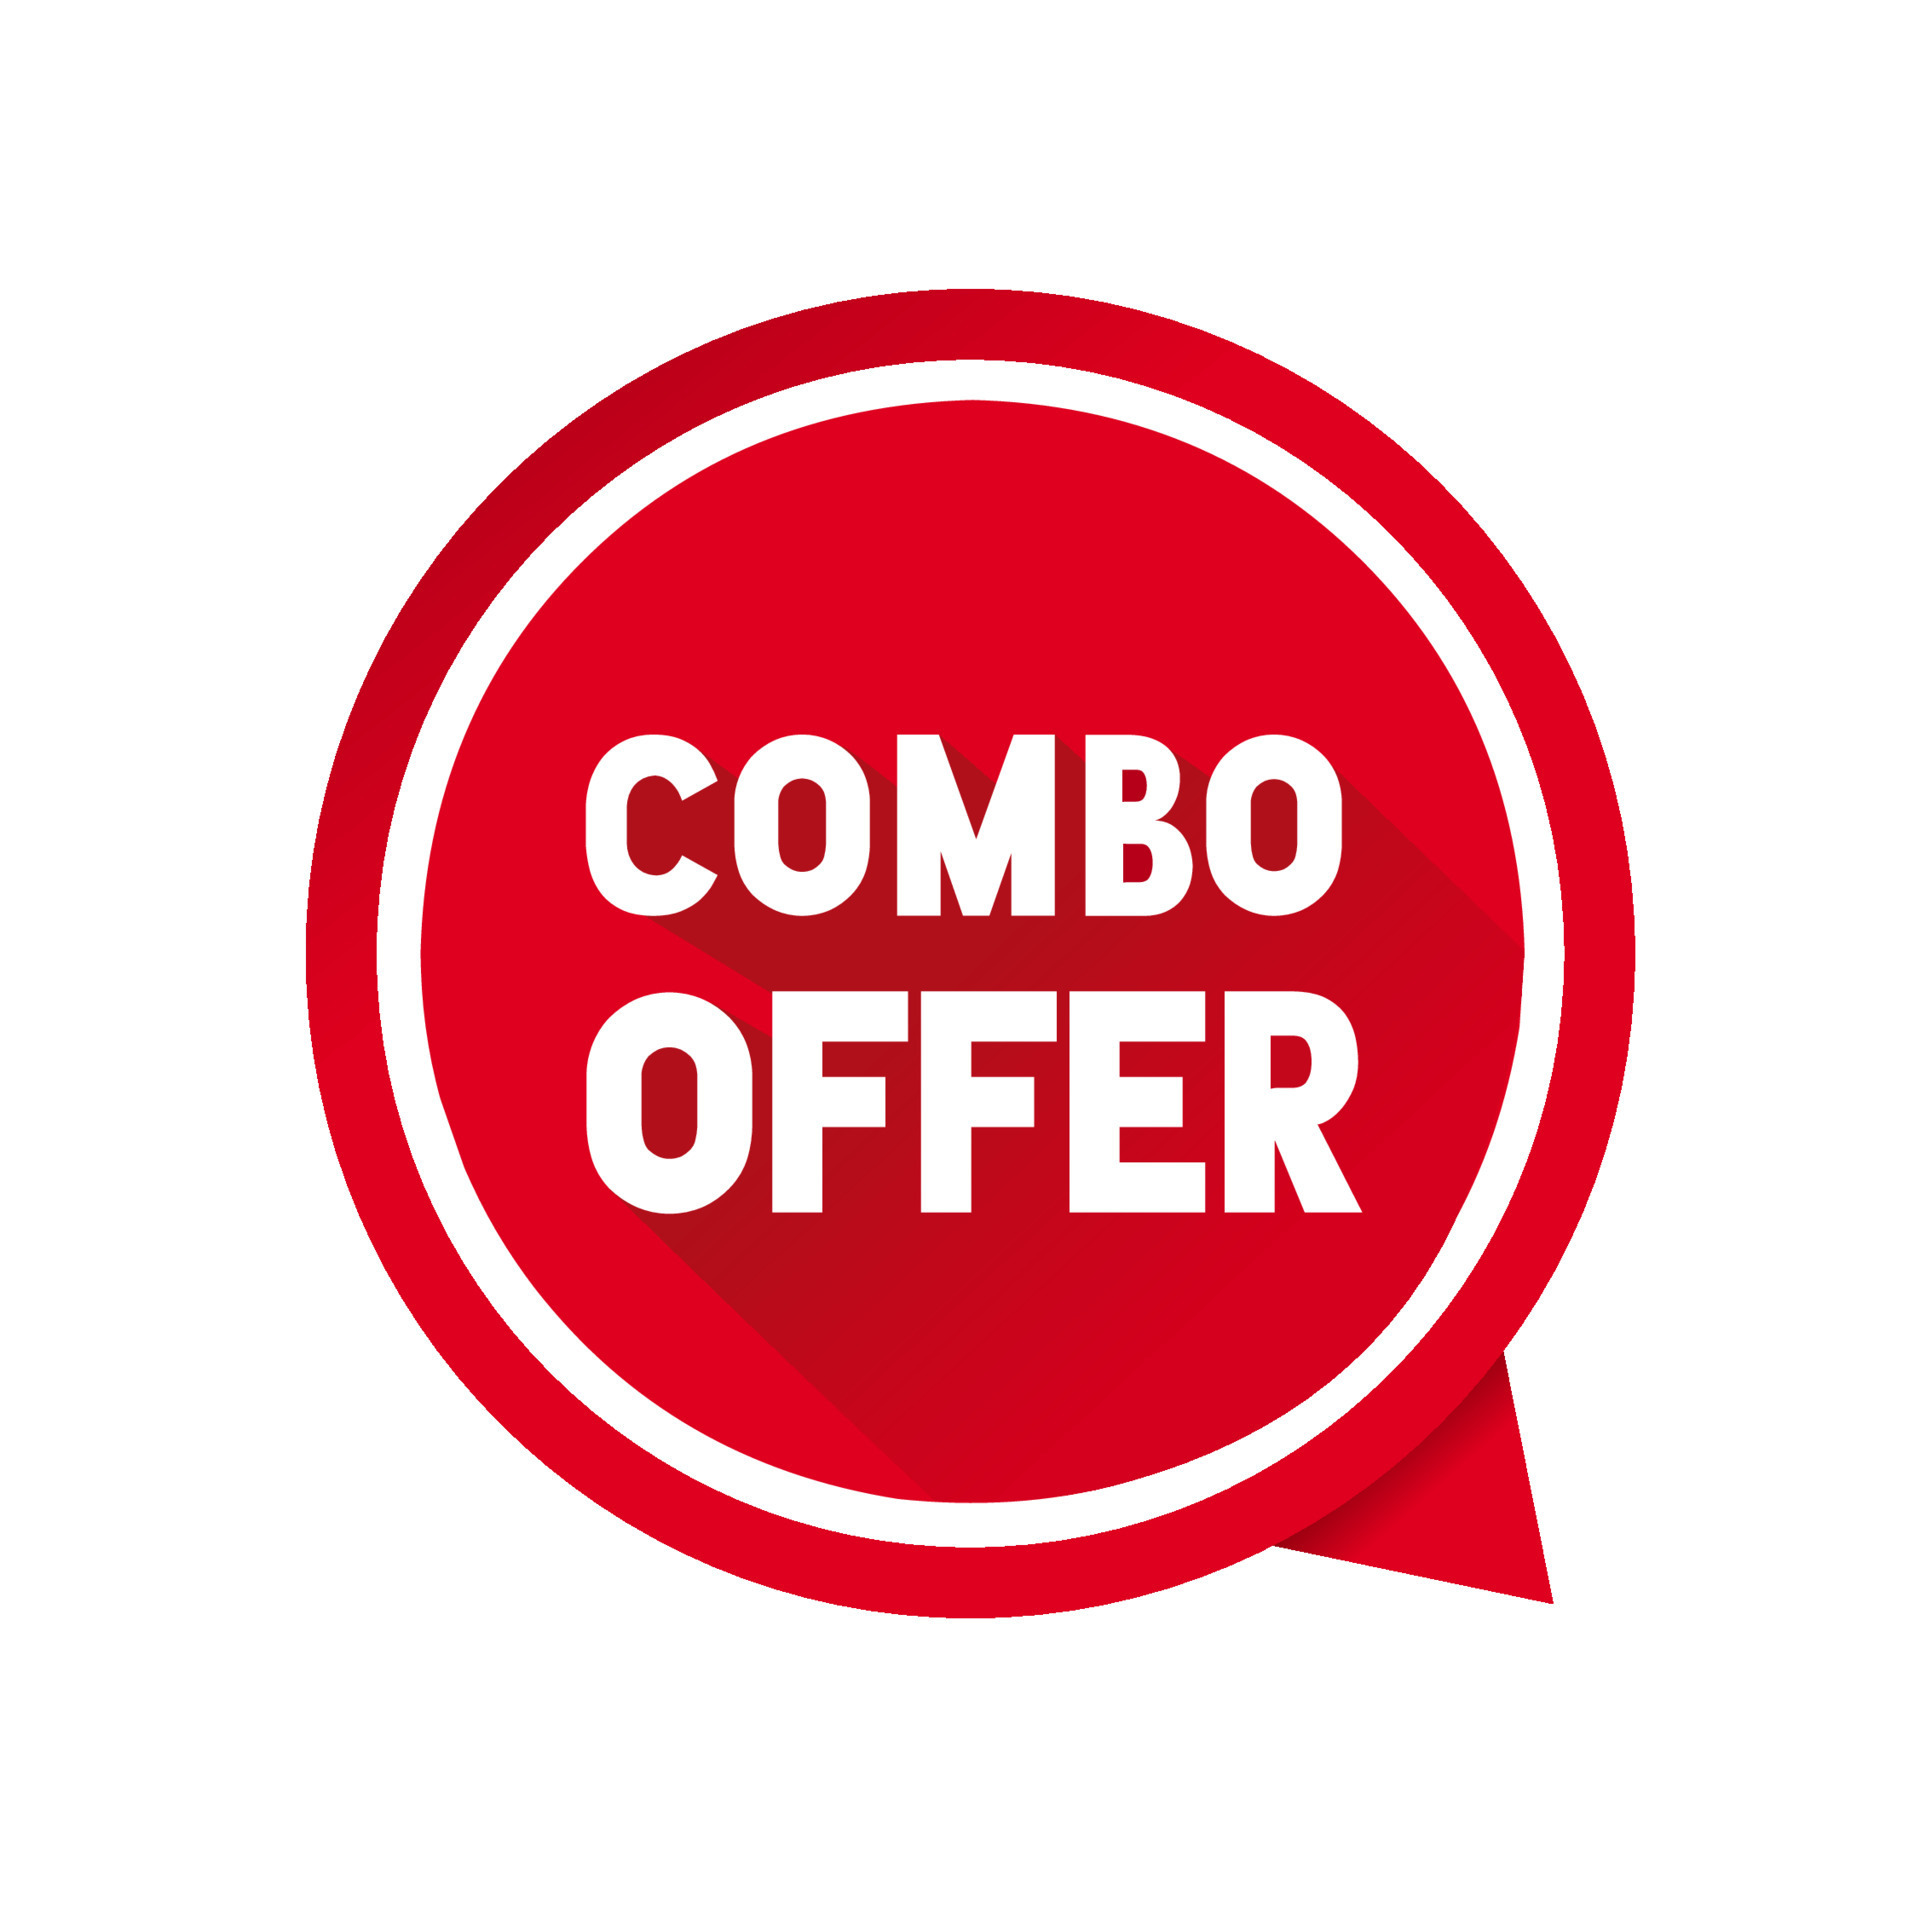 Combo offer banner design. speech bubble icon. Template for retail